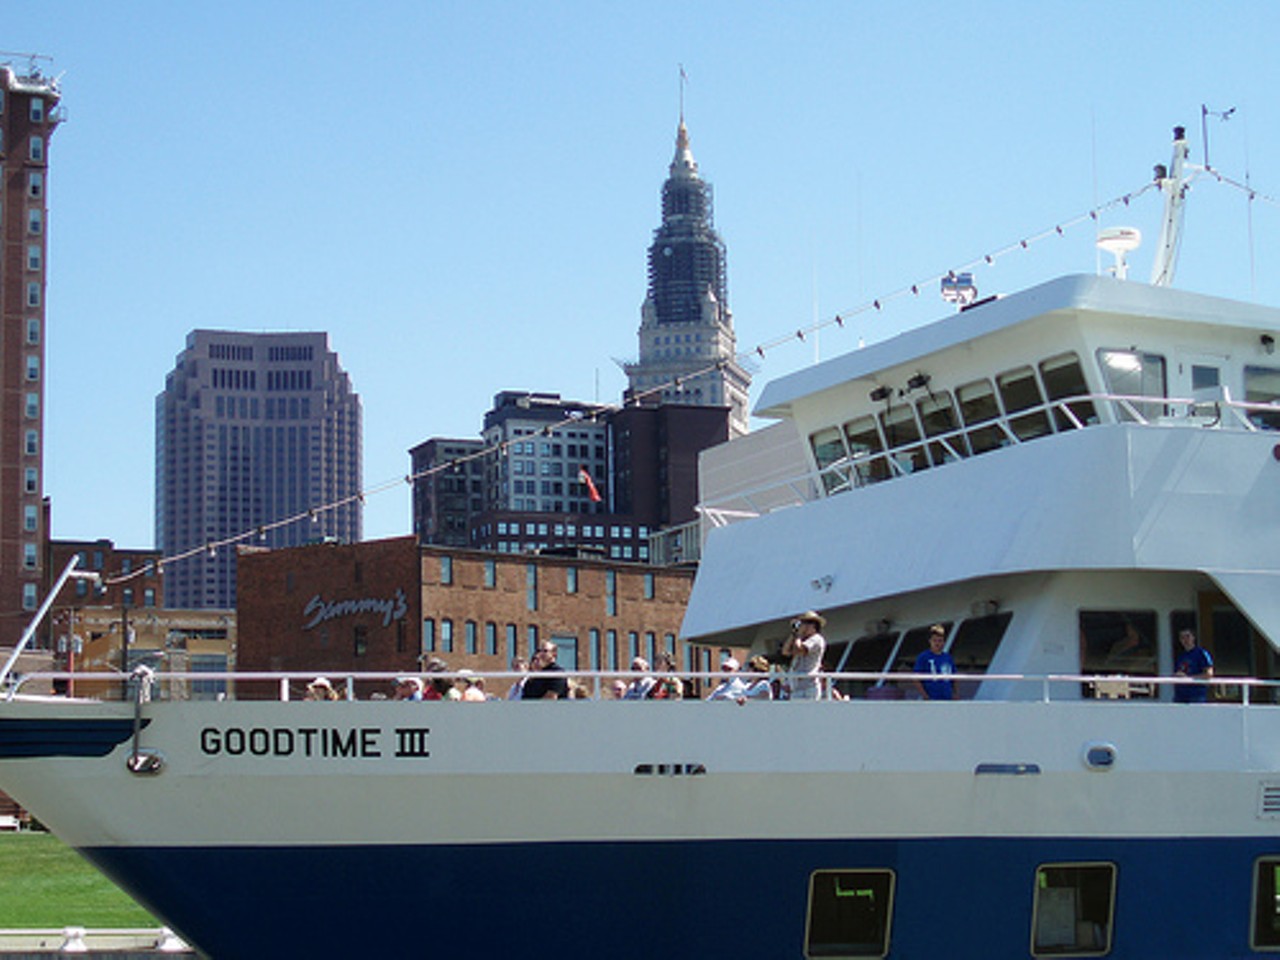 Book a night on the Goodtime III. G'head. You deserve a couple hours of whisky on the lake this weekend.